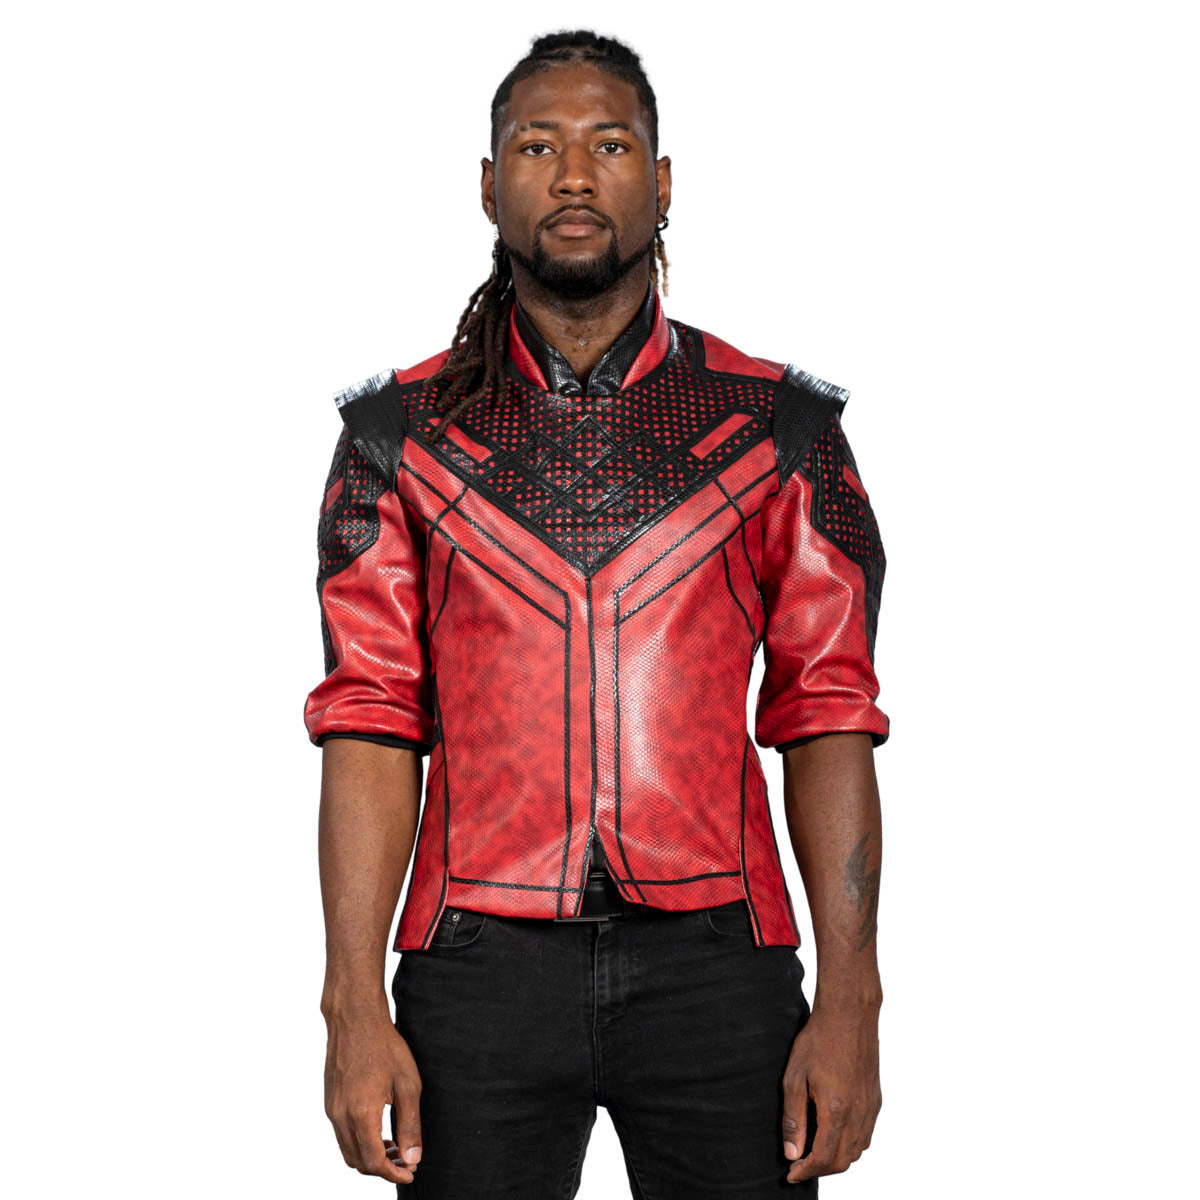 Shang-Chi The Legend of the Ten Rings Costume Zip-Up Jacket